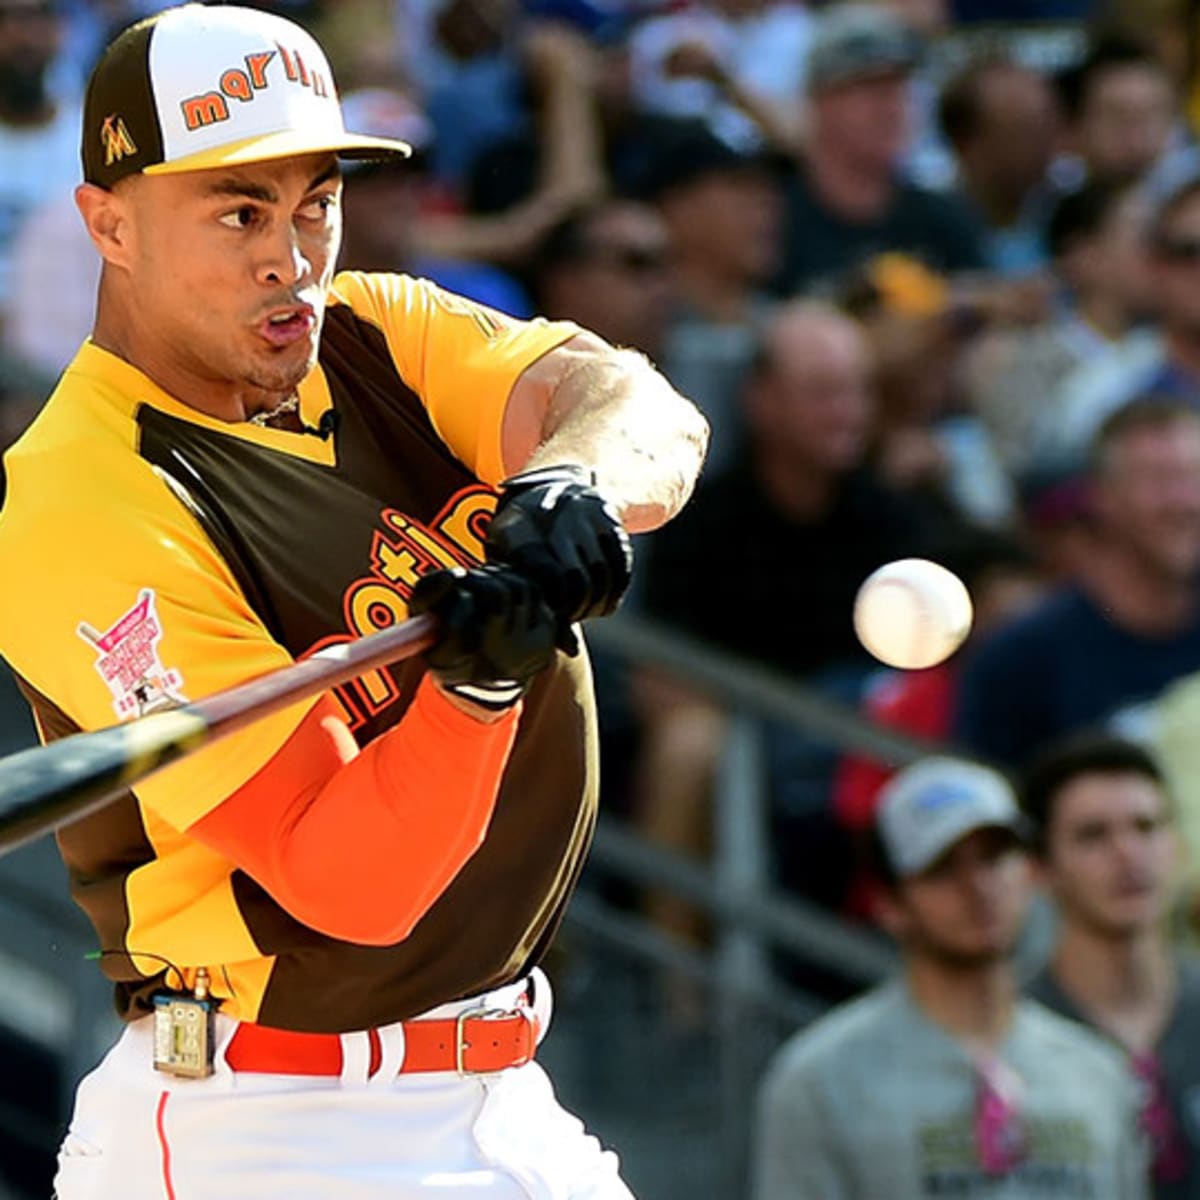 2016 Home Run Derby tracker: Giancarlo Stanton wins in rout